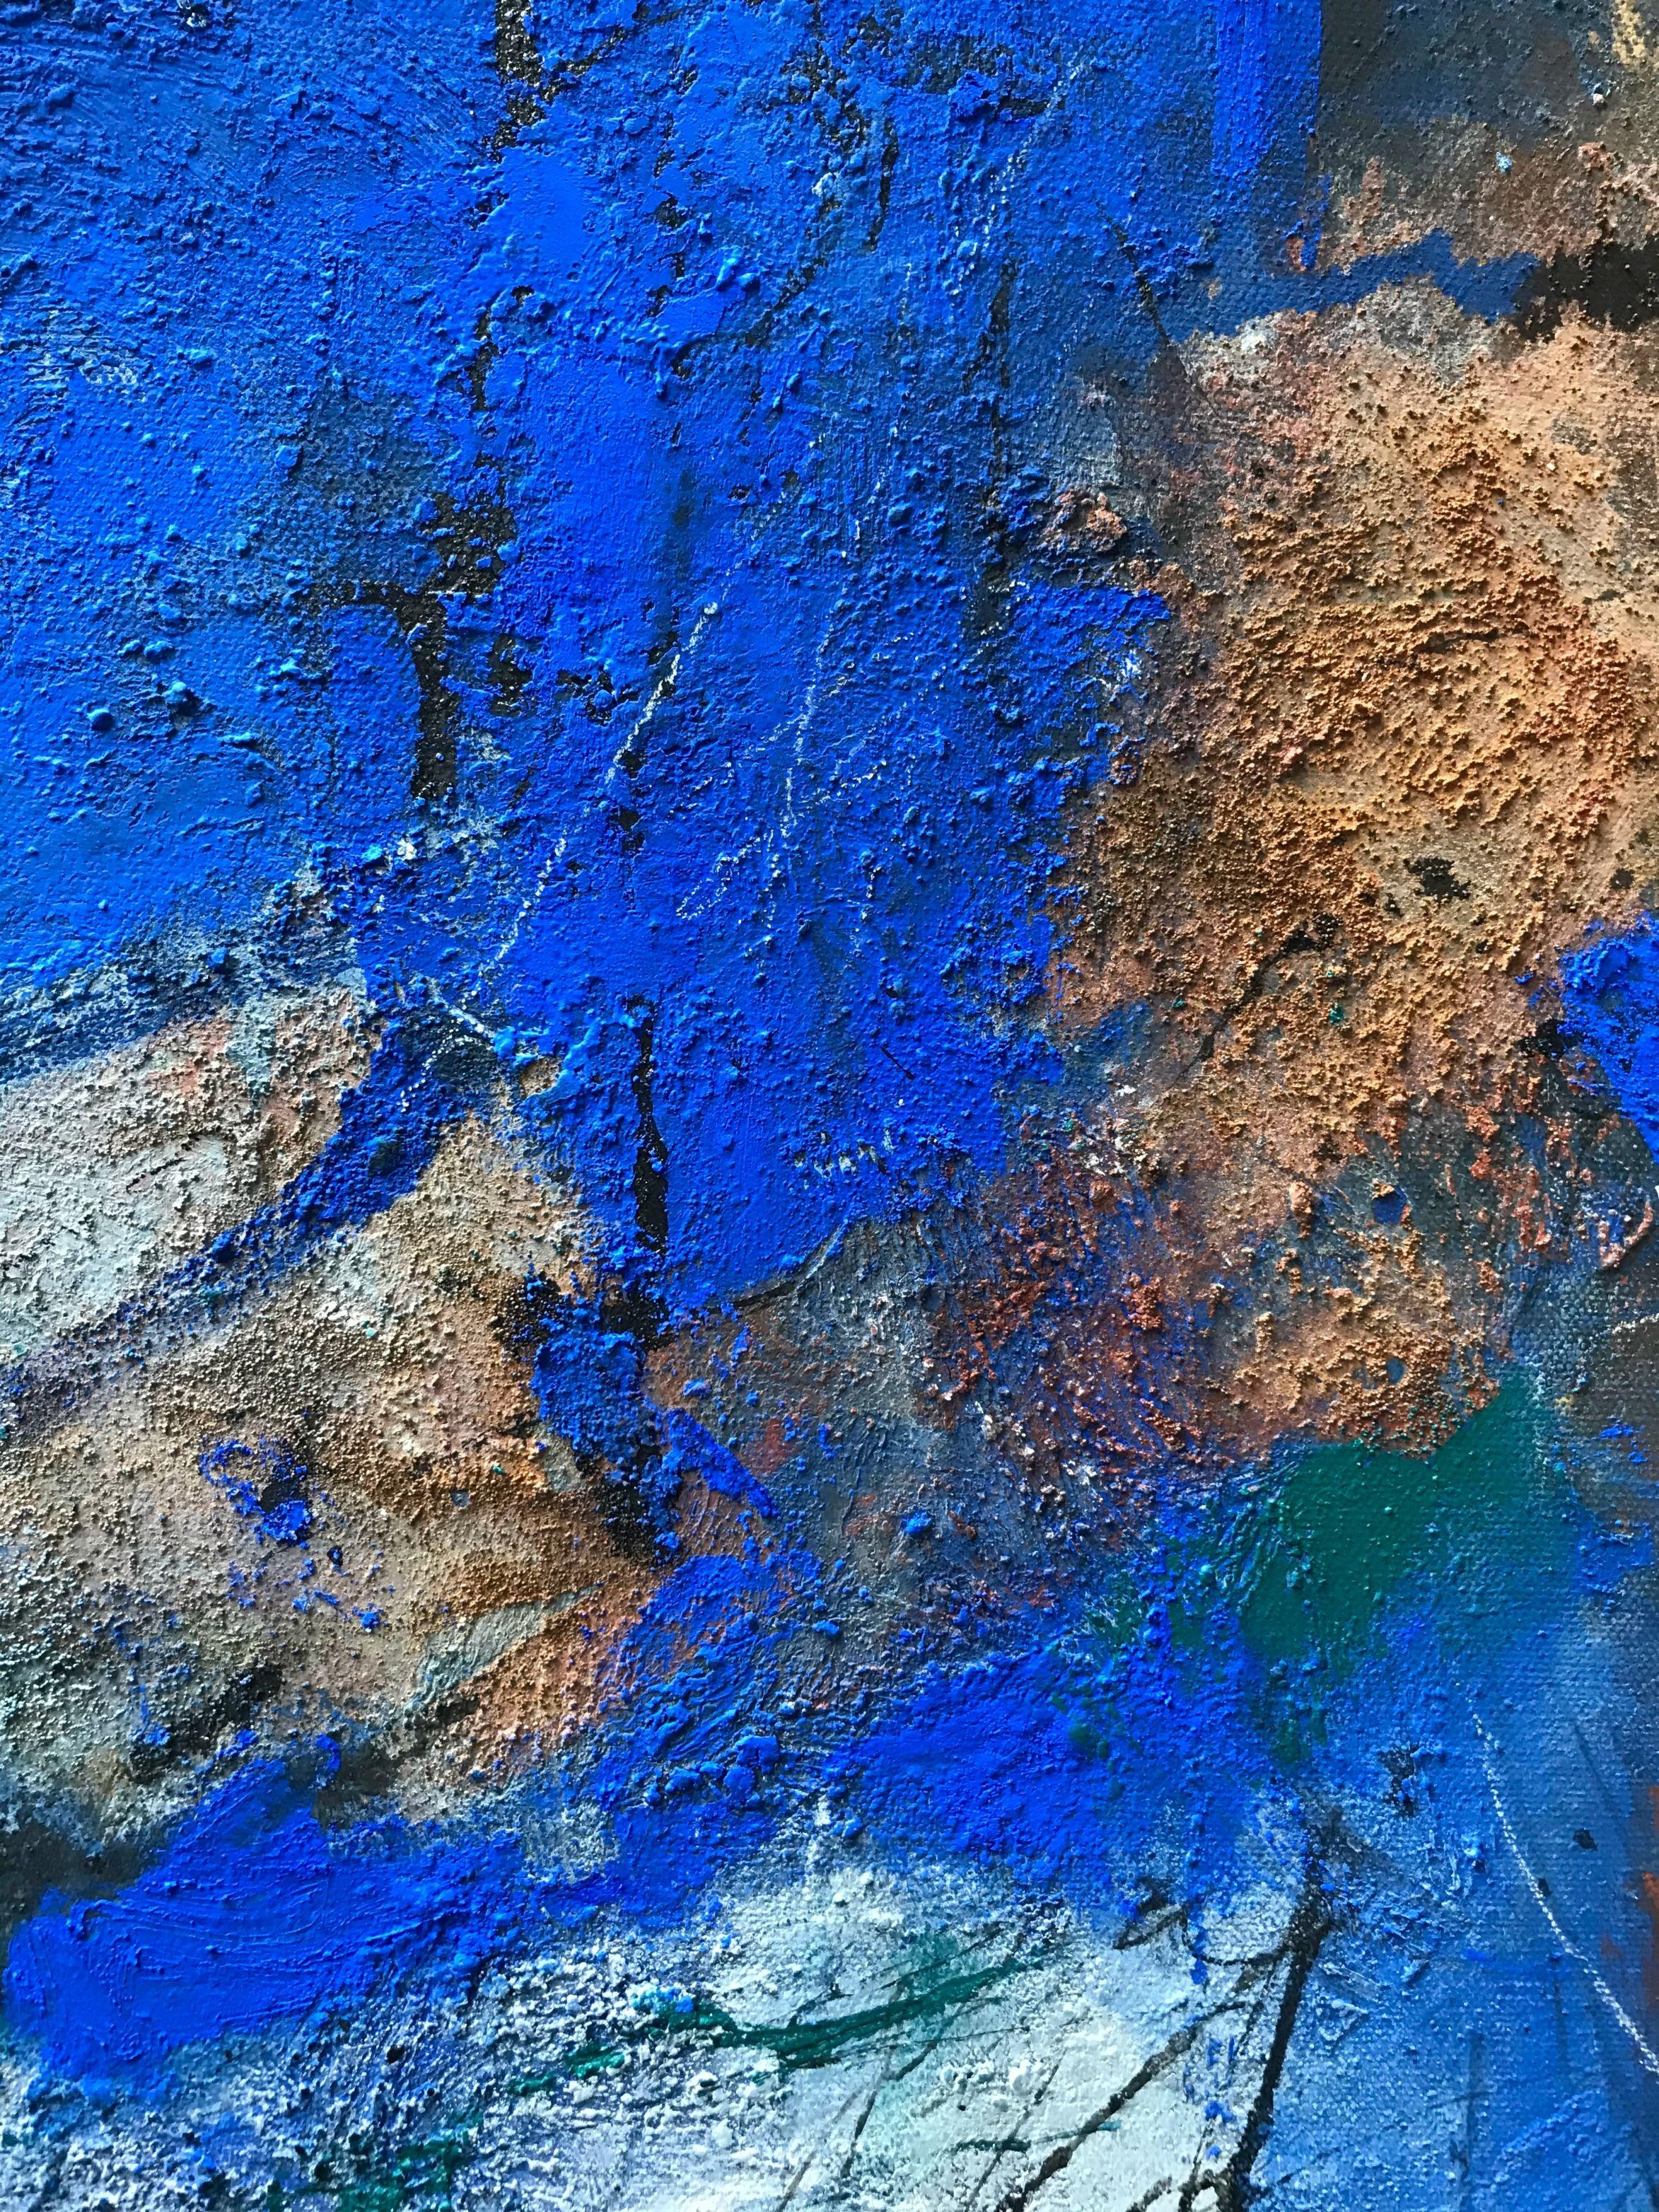 A large, stunningly textured painting with rust and pigments that would be a statement piece on a large wall. This work was guided by intuition, reflecting processes in nature in the creative process of making this painting. Structures were created